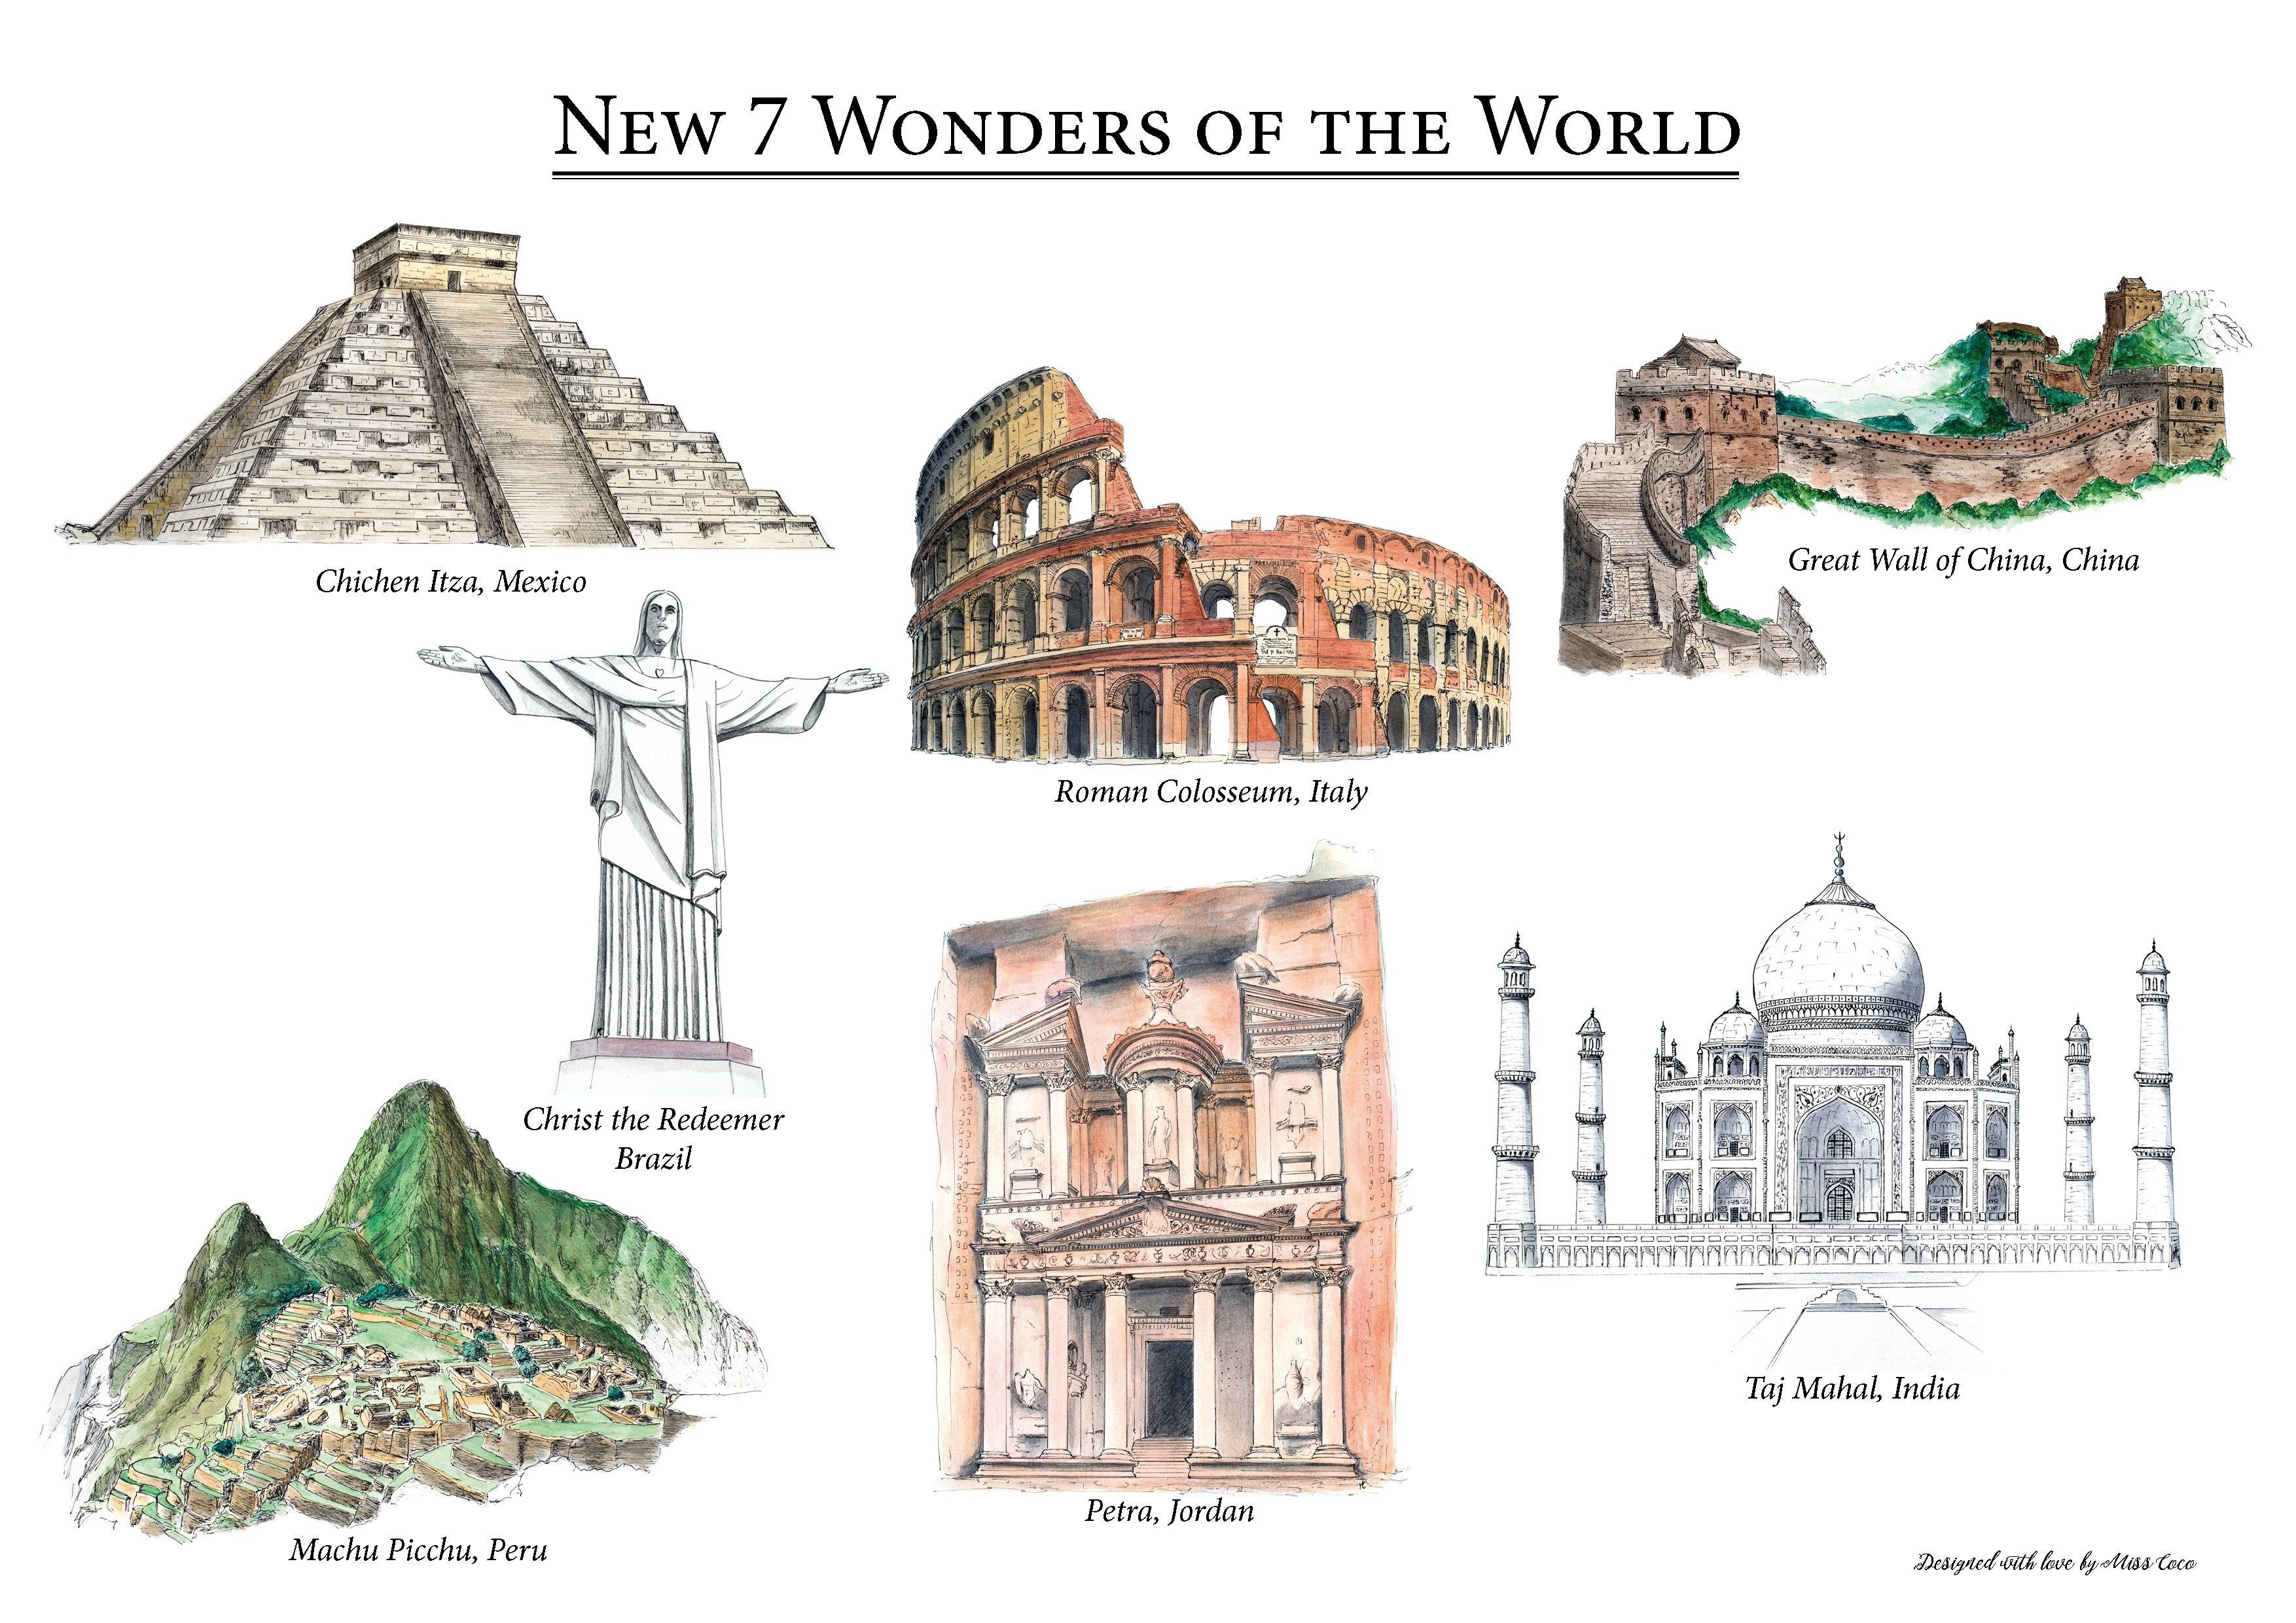 Seven wonders of the world are. New Seven Wonders of the World. Чудеса света рисунок. 7 Чудес света рисунок. 7 Чудес света фото.